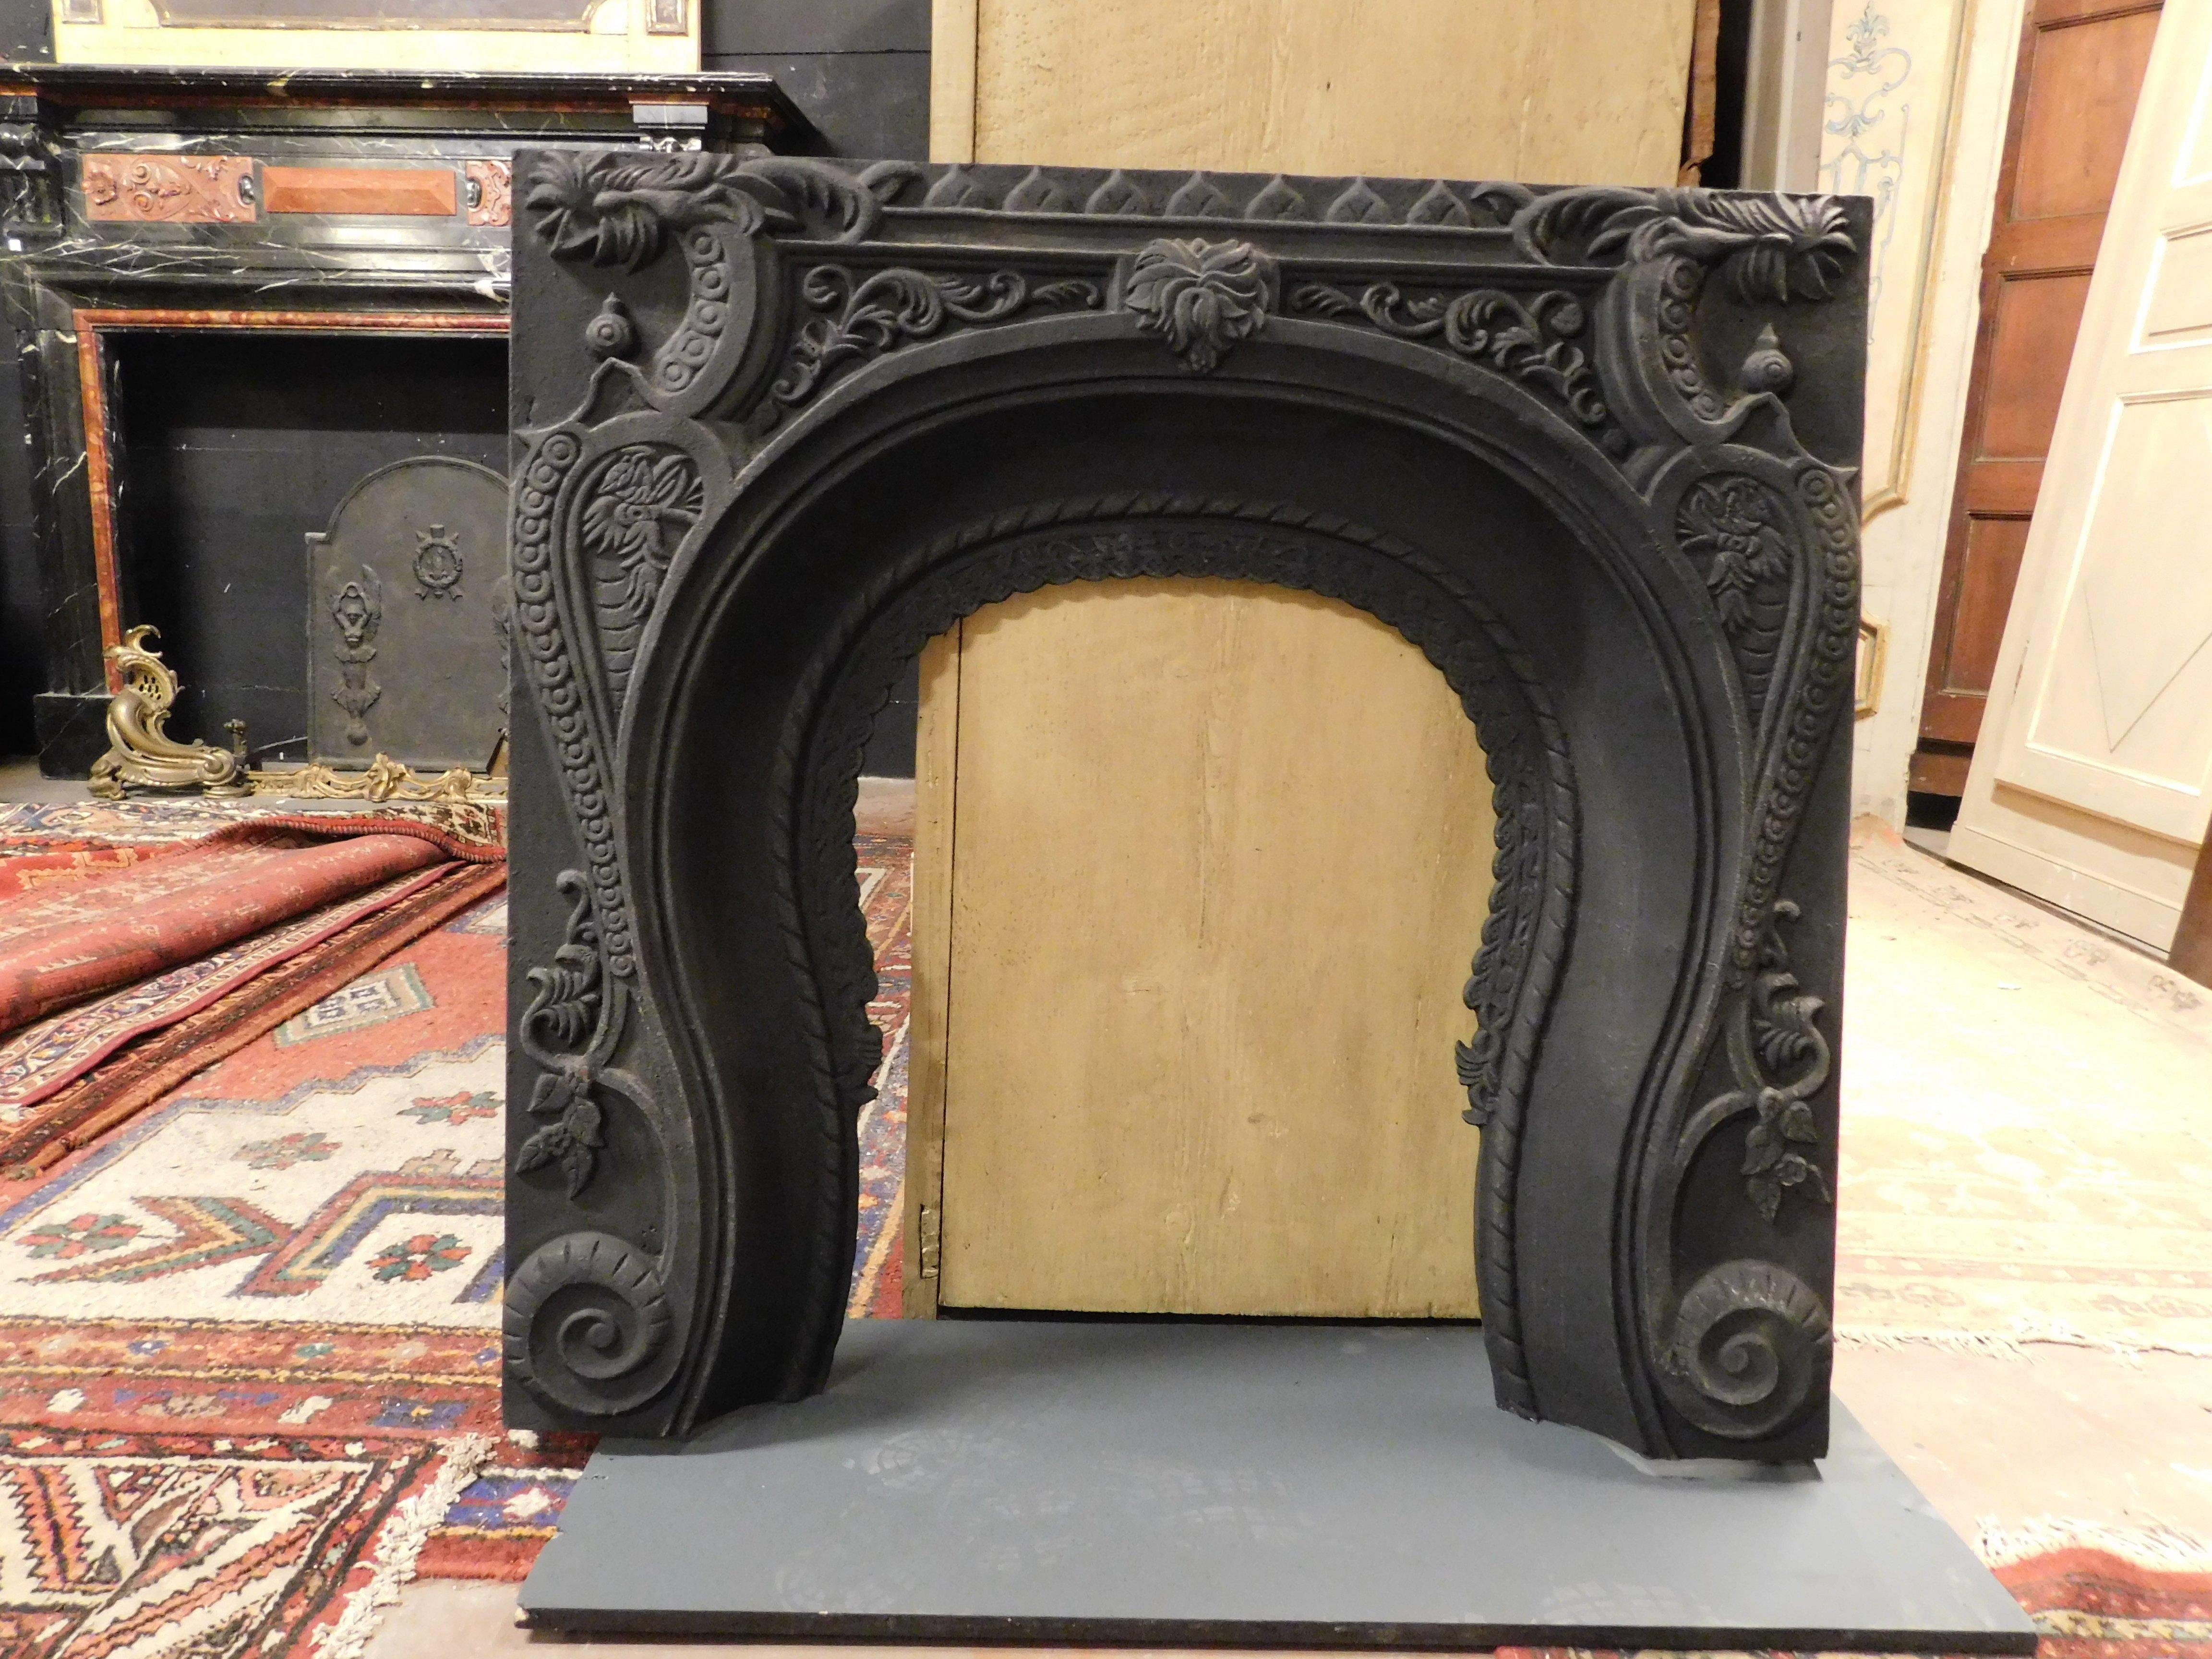 Antique fireplace mantle, carved cast iron stove with very rich floral decorations and rounded mouth, built in the 19th century in Italy and used as a fireplace insert. Given its thickness, it can also be used as a stove pediment, or it could go